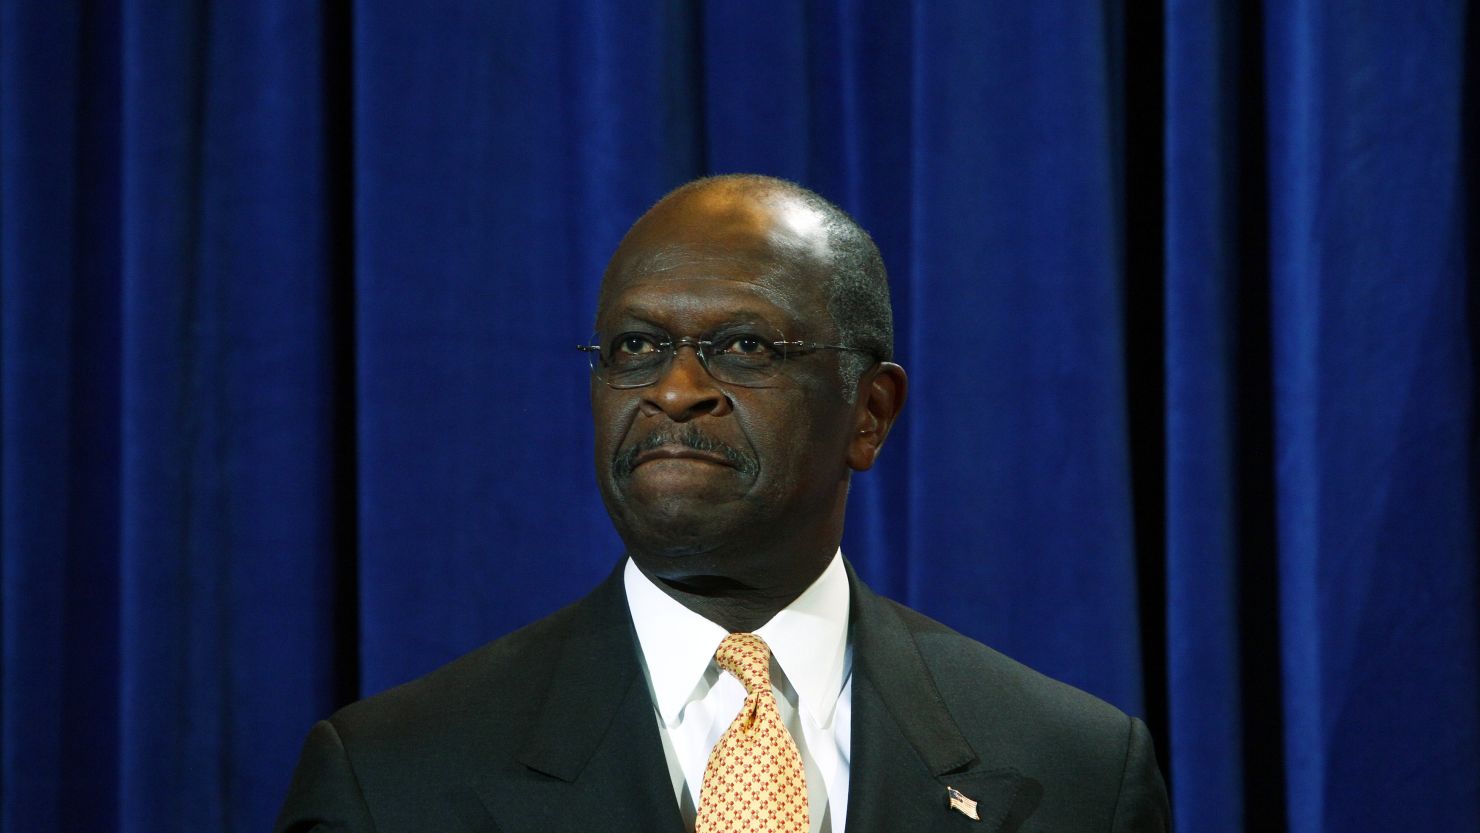 Herman Cain has denied allegations of sexual harassment and his campaign for president continues.